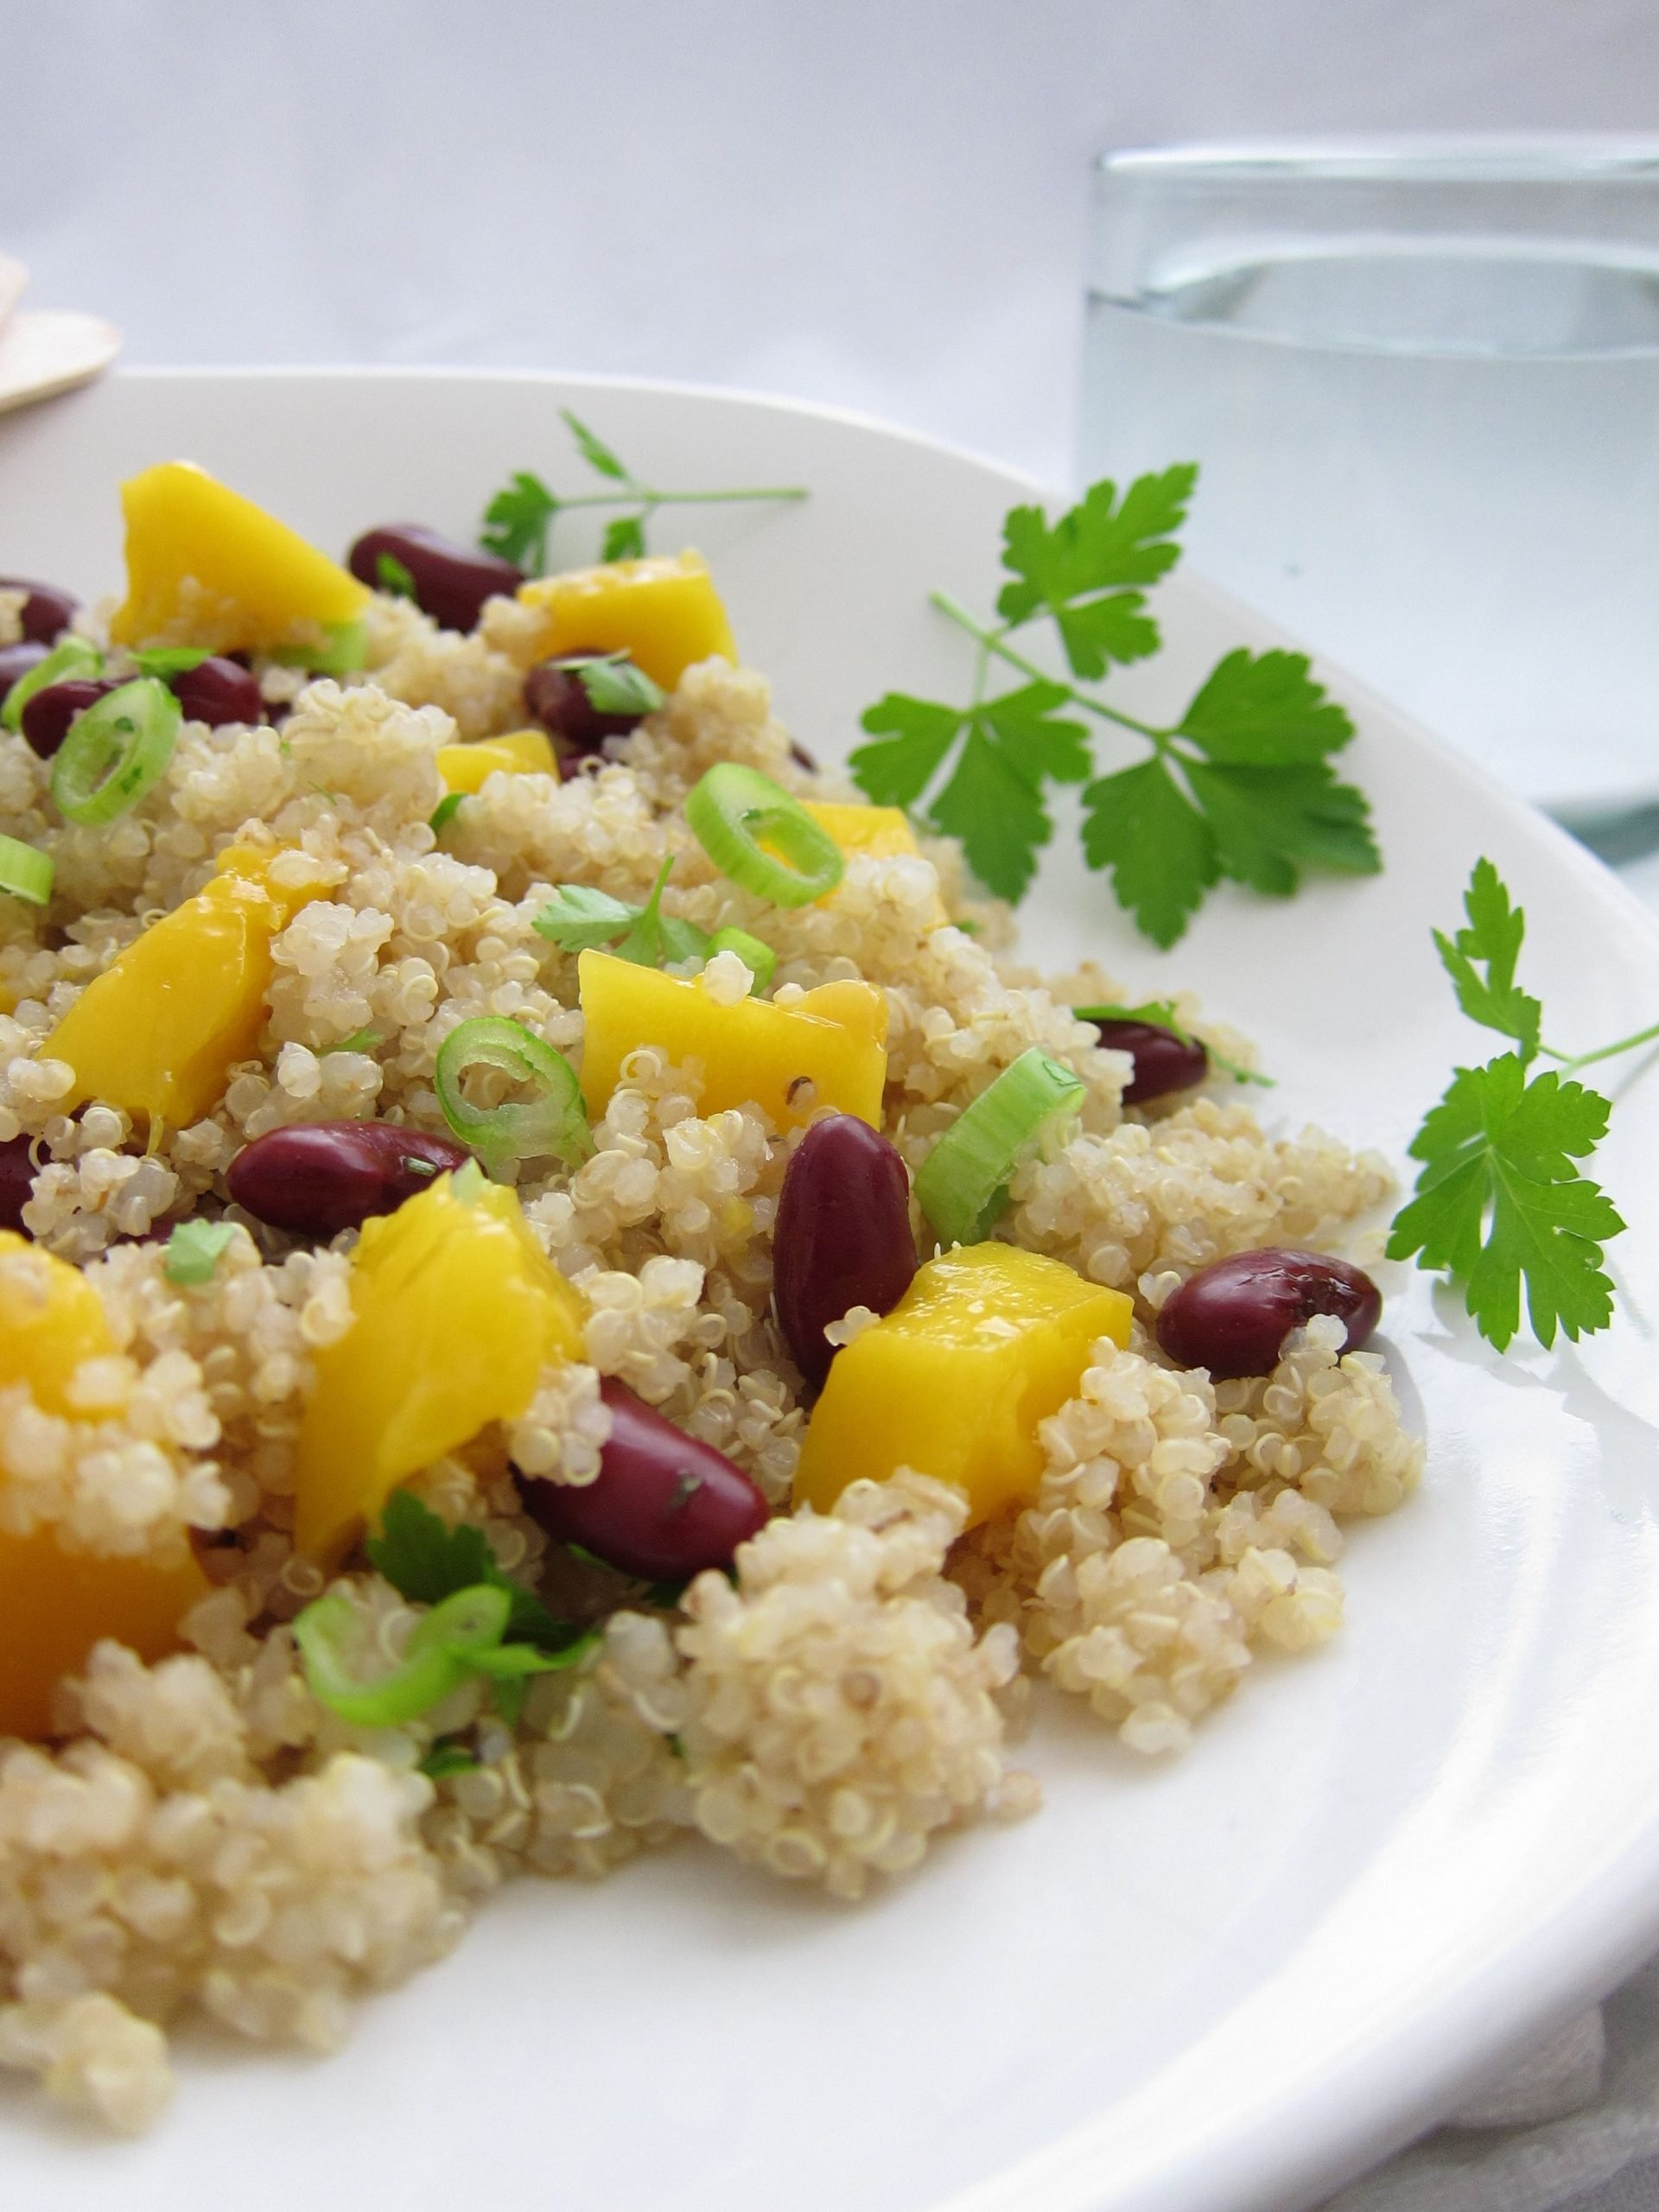 Quinoa Salad with Kidney Beans and Mango